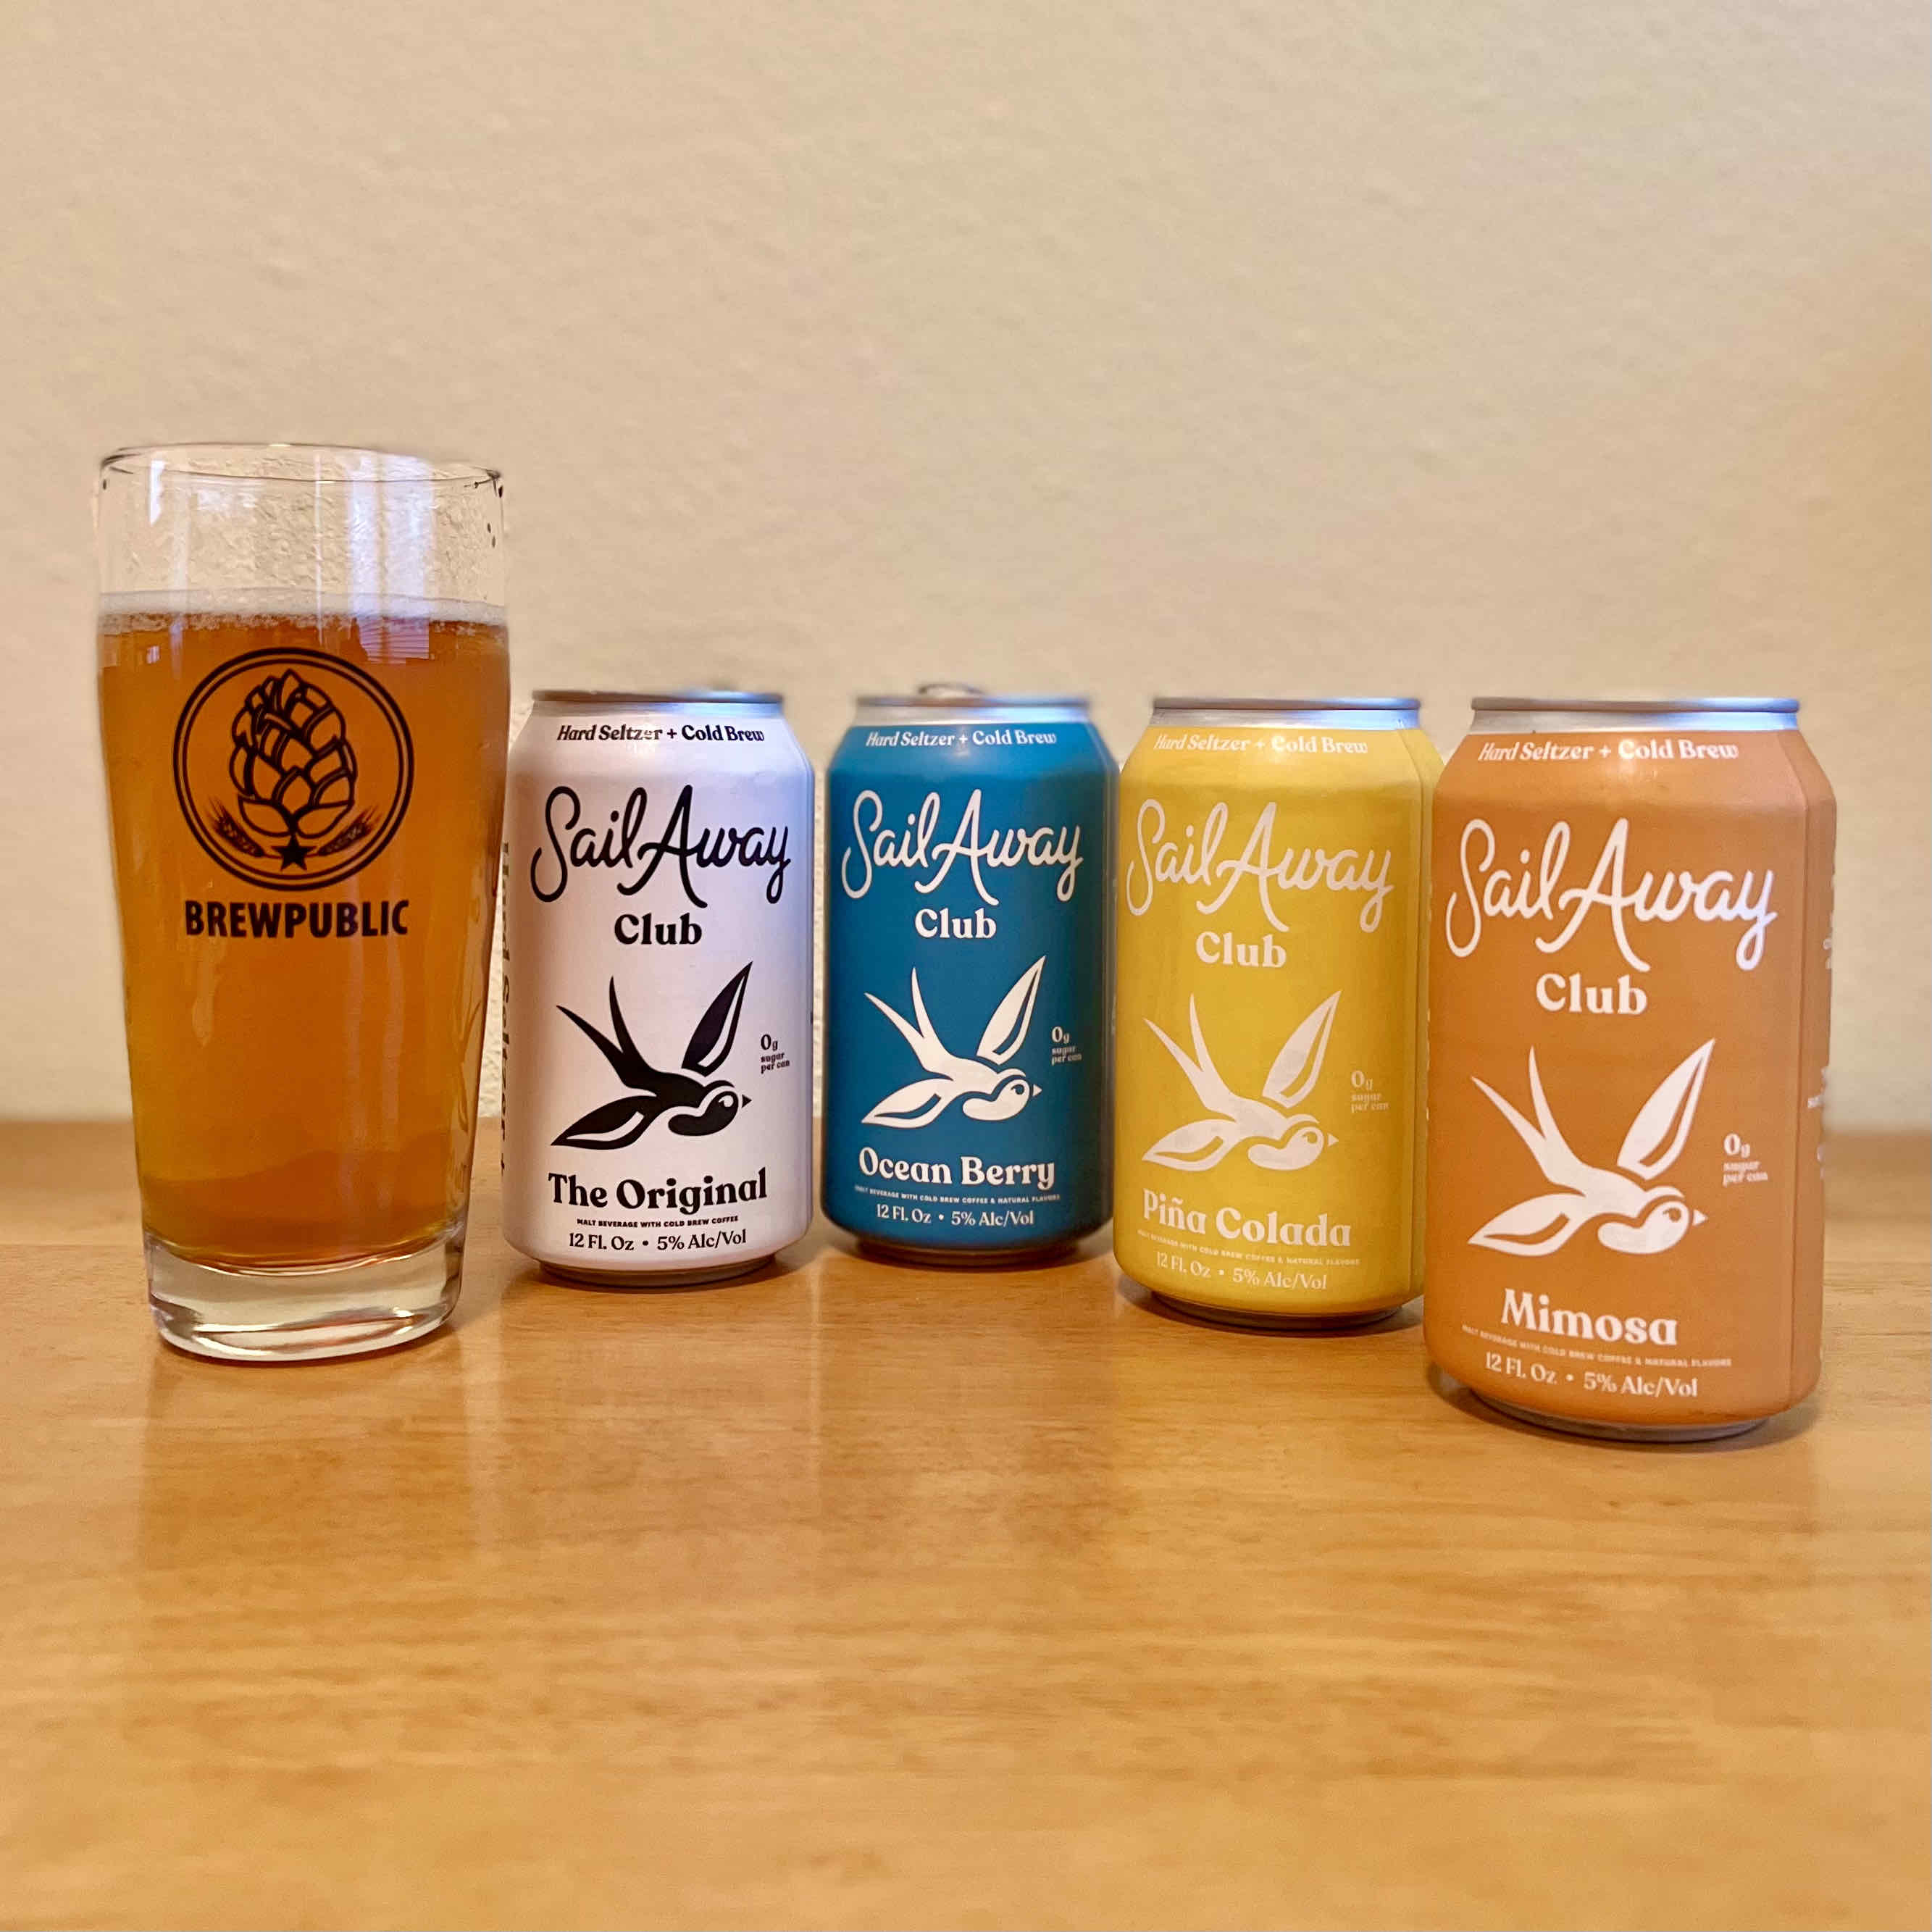 The lineup of Sail Away Coffee Co. Hard Seltzer x Cold Brew in four flavors - The Original, Ocean Berry, Pina Colada, and Mimosa.